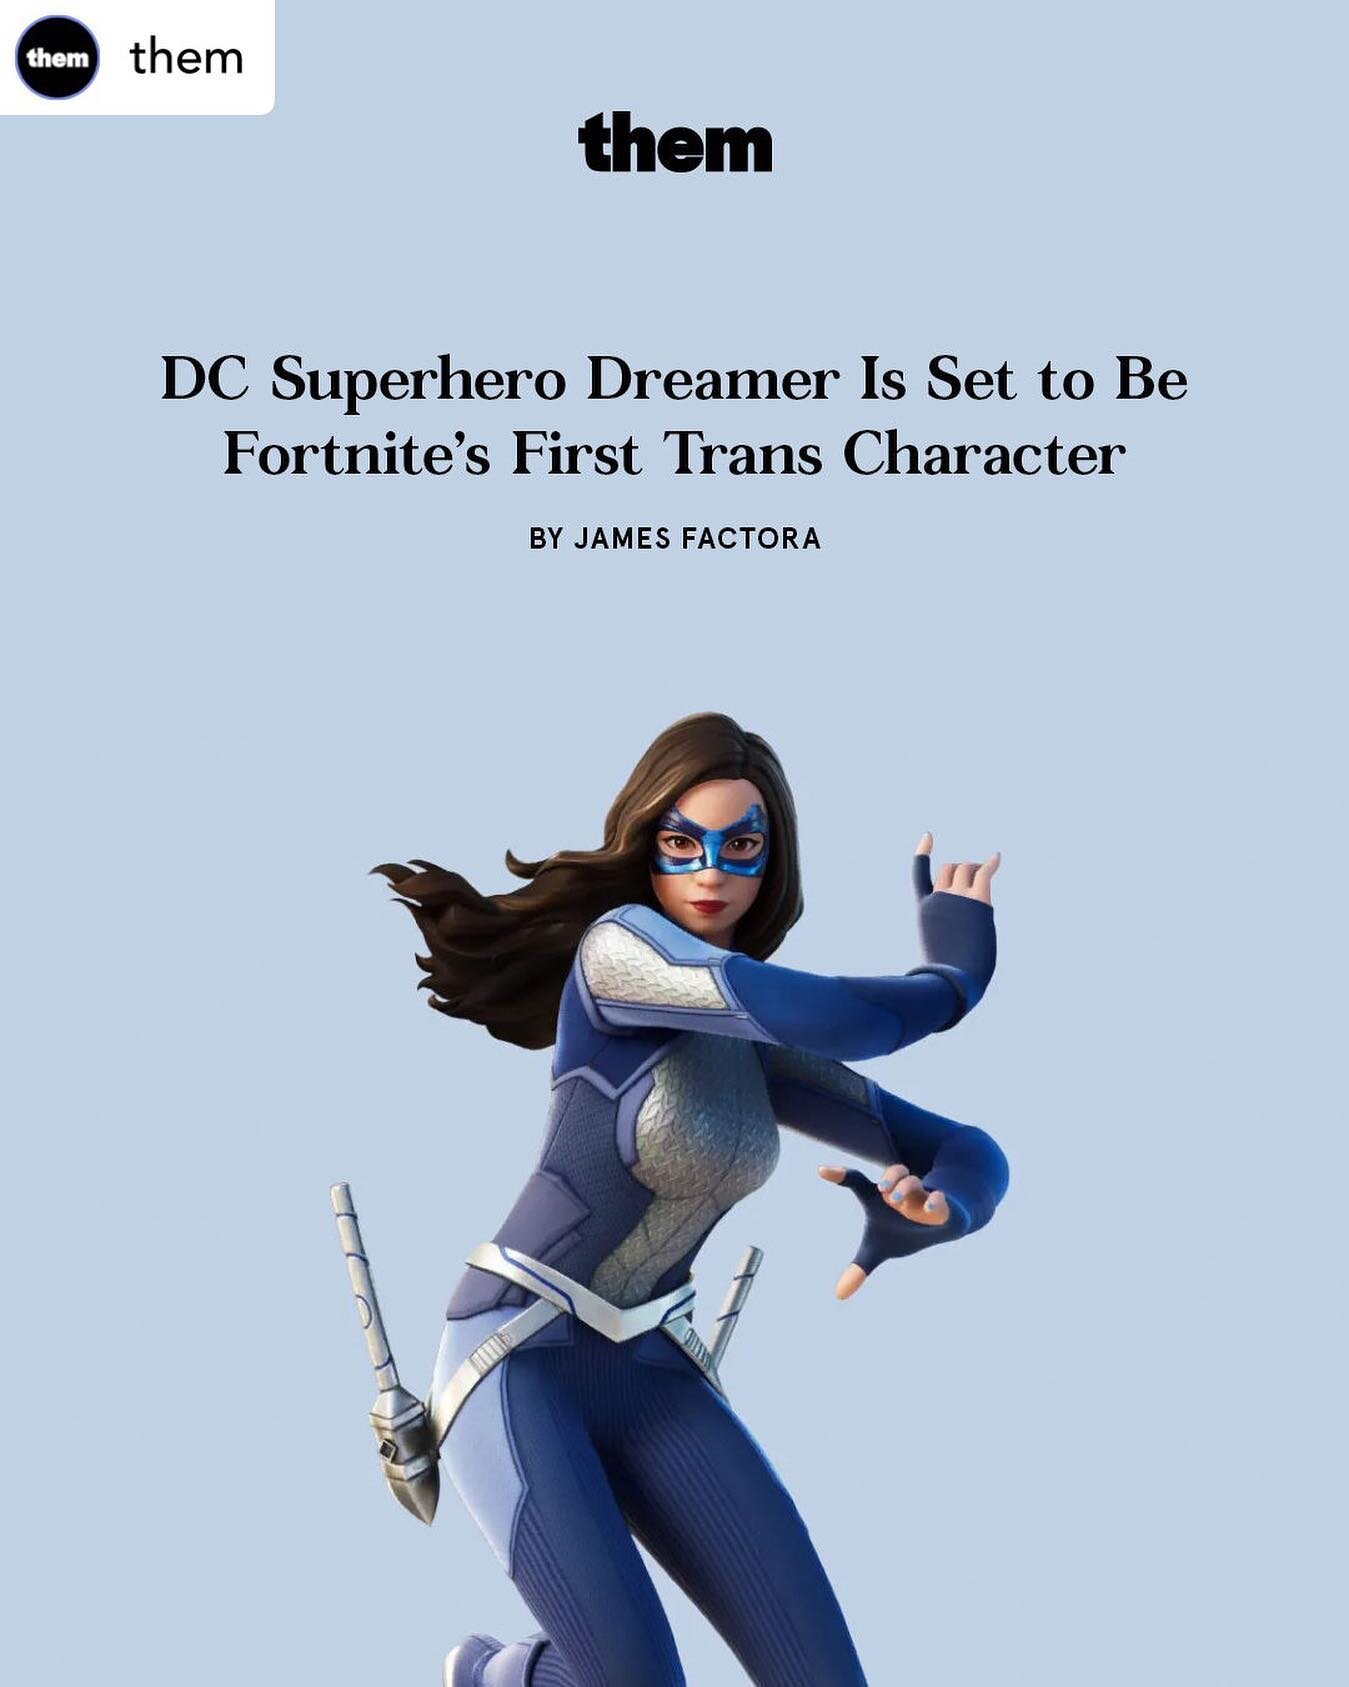 We love to see it!! 

ID: an article from @them with a headline saying &ldquo;DJ Super Hero Dreamer Is Set to Be  Fortnite&rsquo;s First Trans Character&rdquo;. The headline is above and image of Dreamer. She has long, brown hair and is wearing a blu